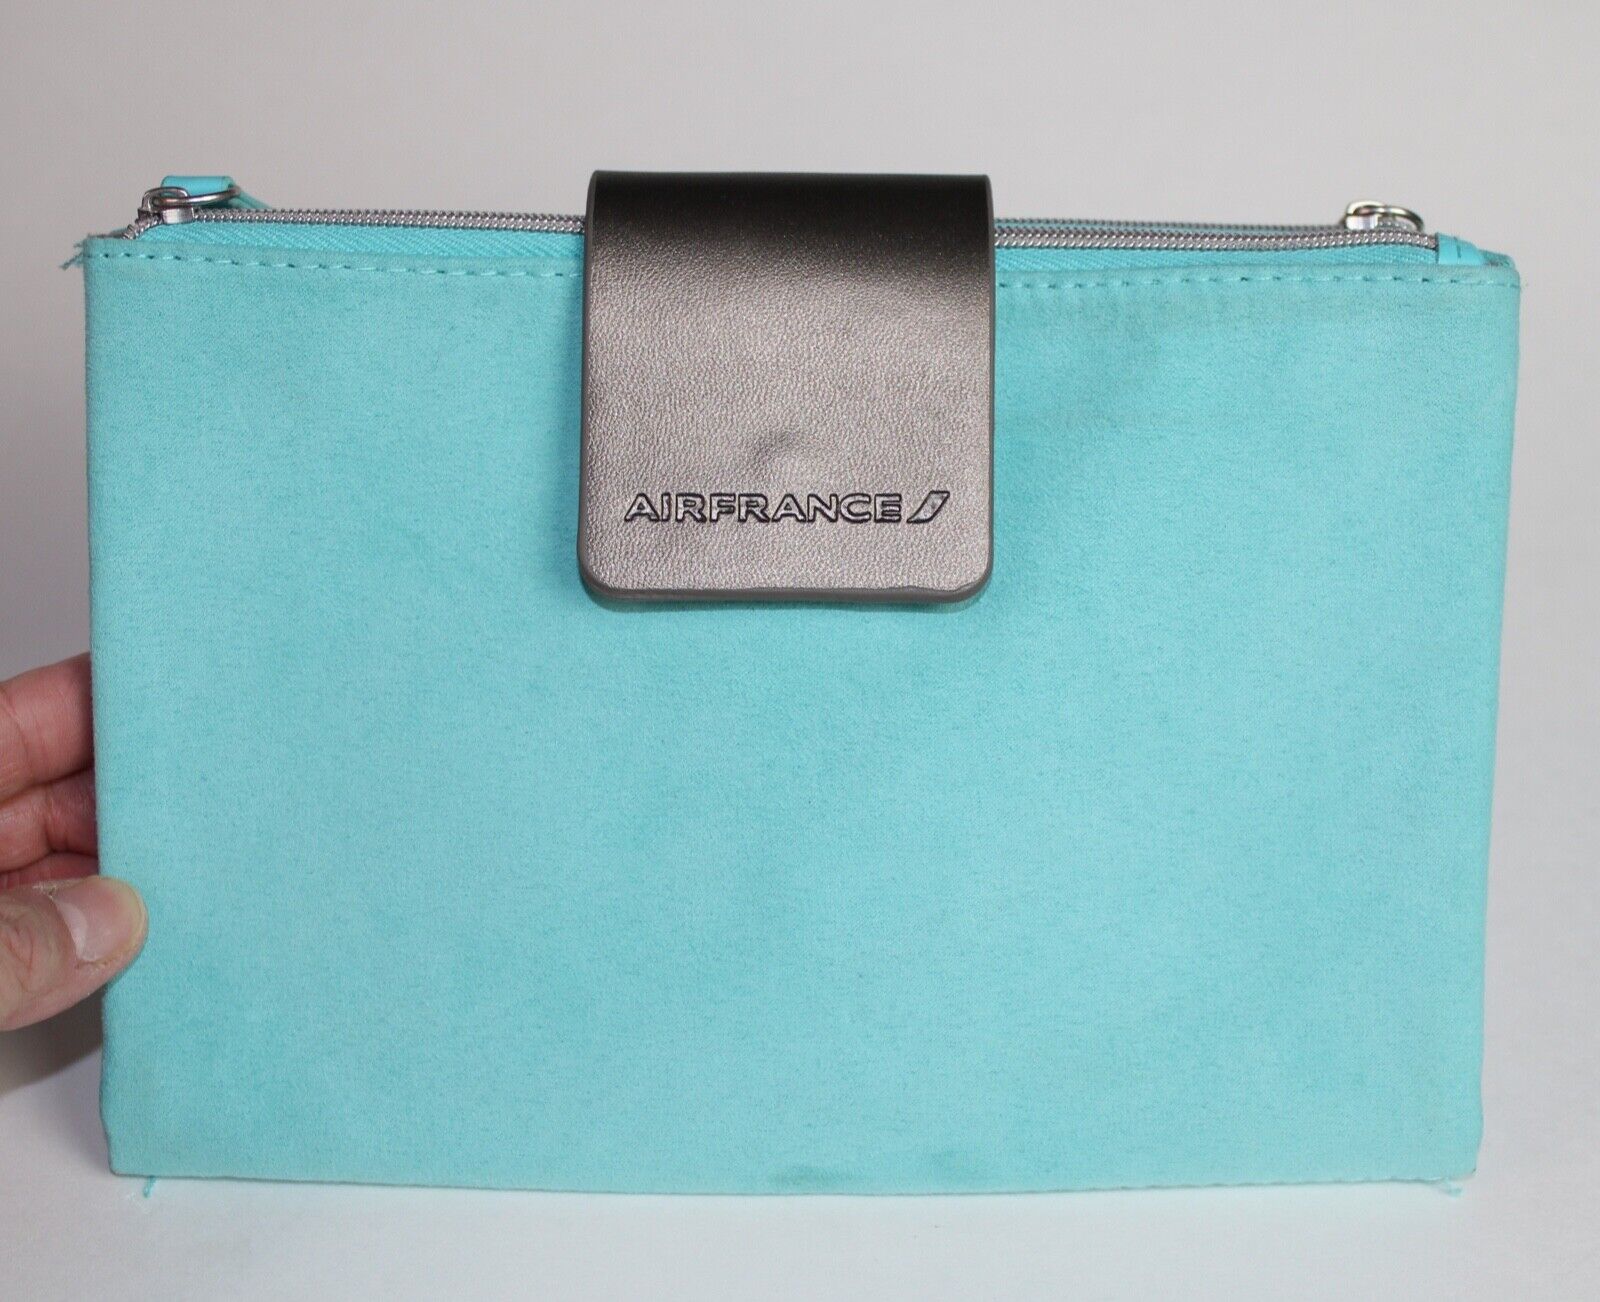 NEW Unused Air France Double Compartment Dual-Zippered Pouch Bag Turquoise Blue